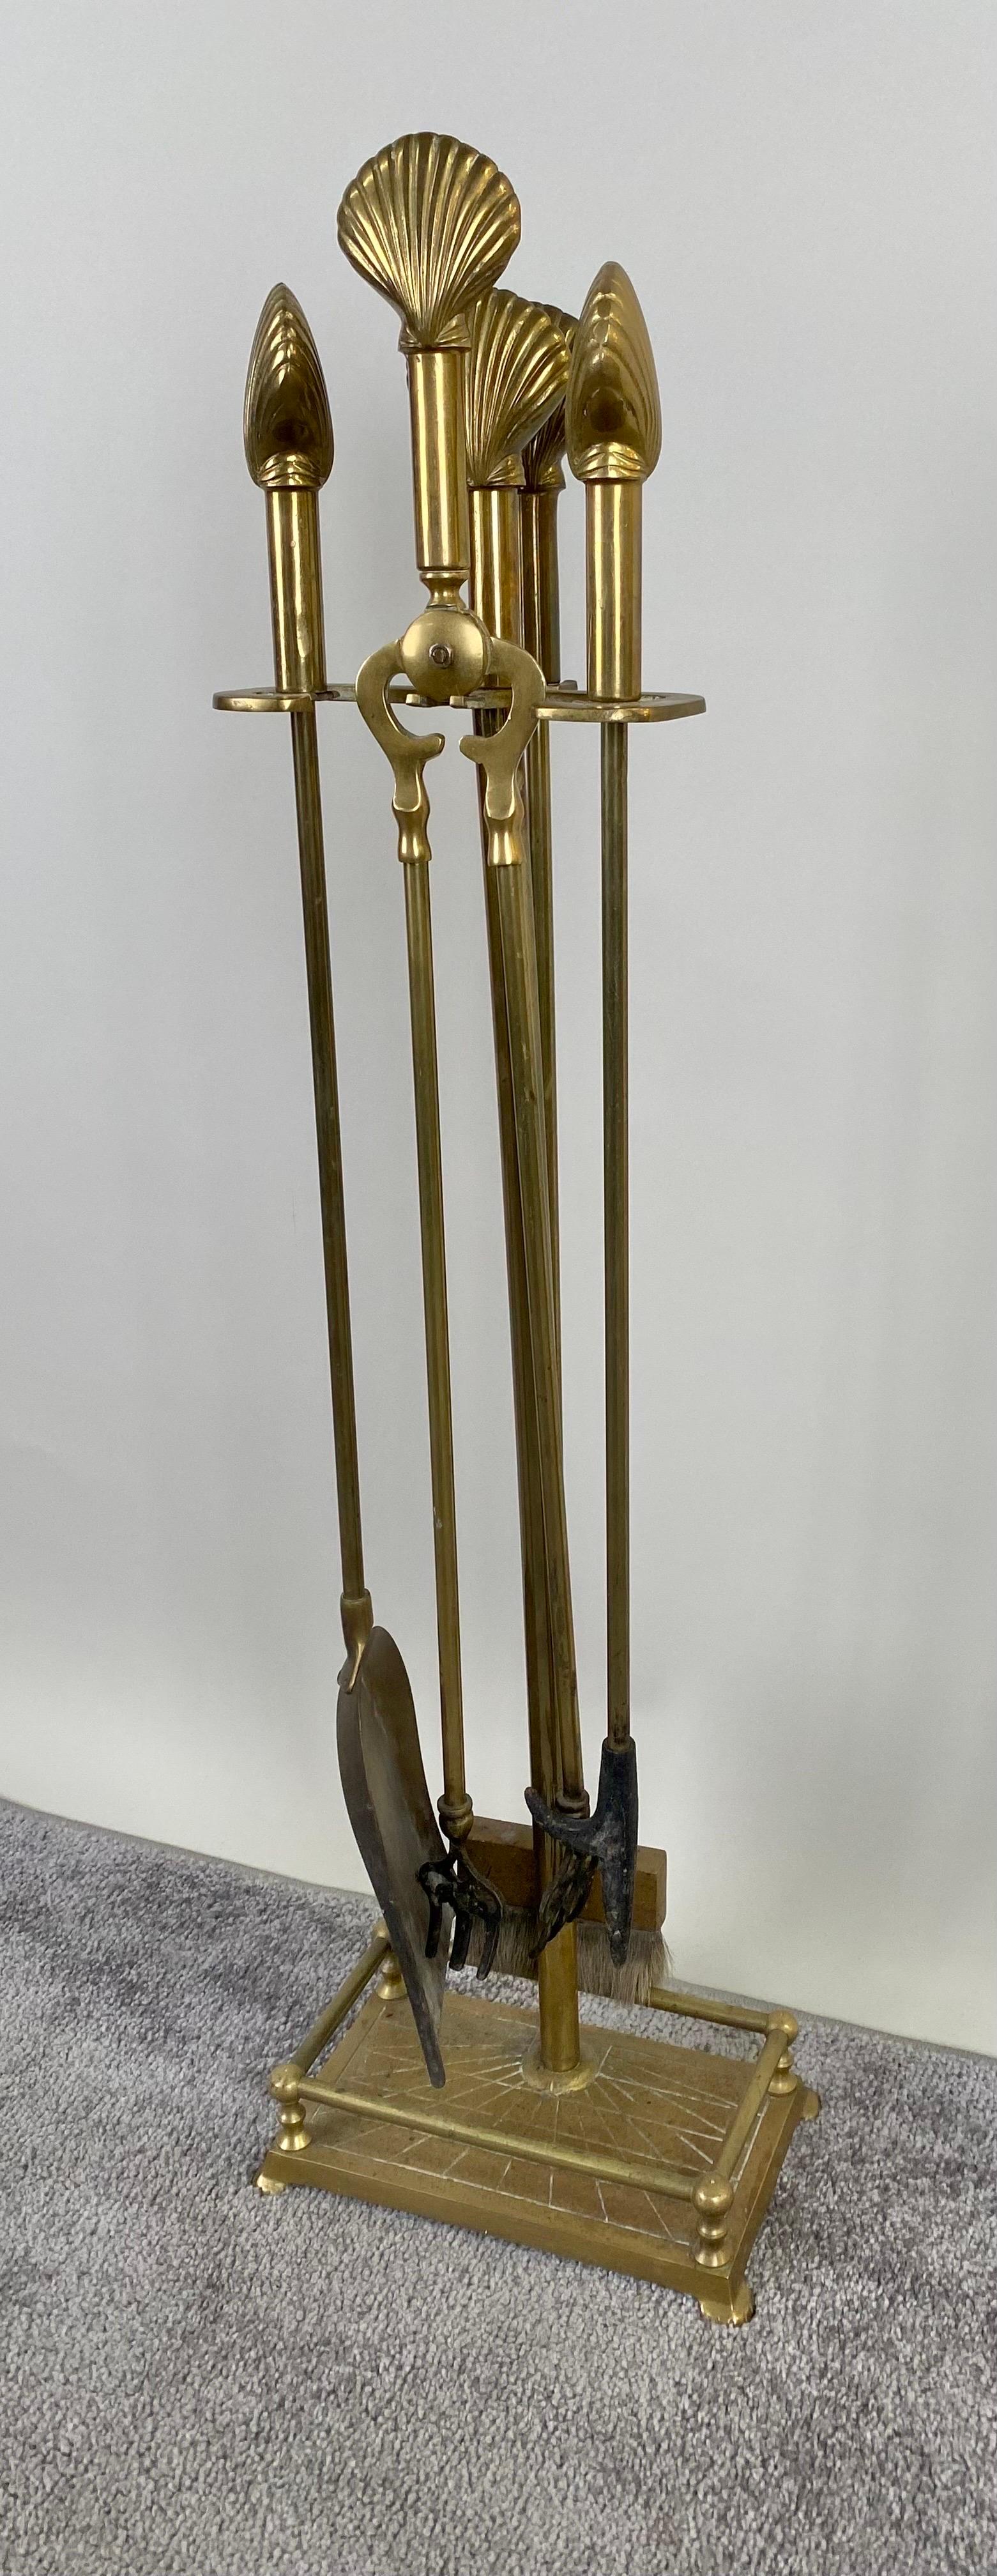 Art Deco Fireplace Brass SeaShell Design Tools  In Good Condition For Sale In Plainview, NY